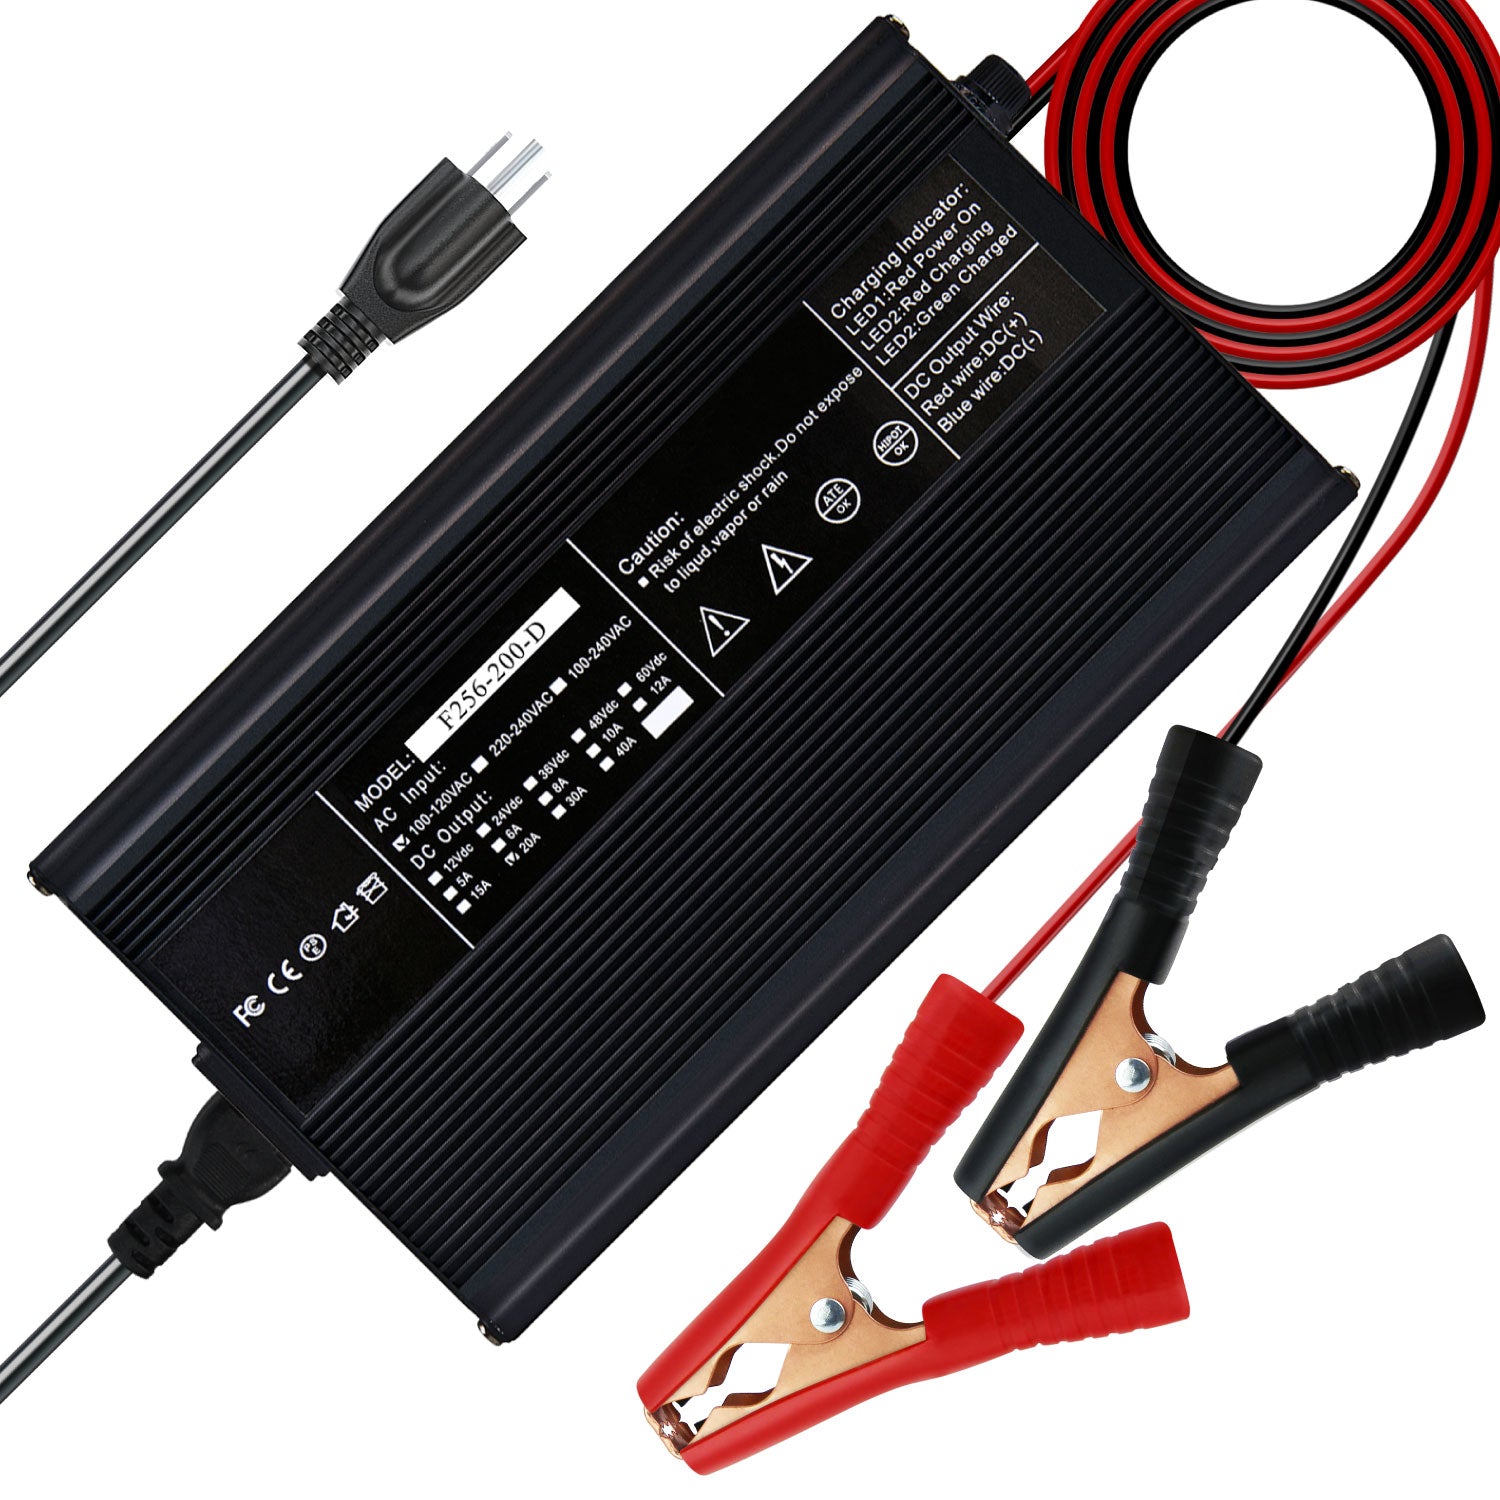 24V 5A LiFePO4 Battery Charger – Lithium Master